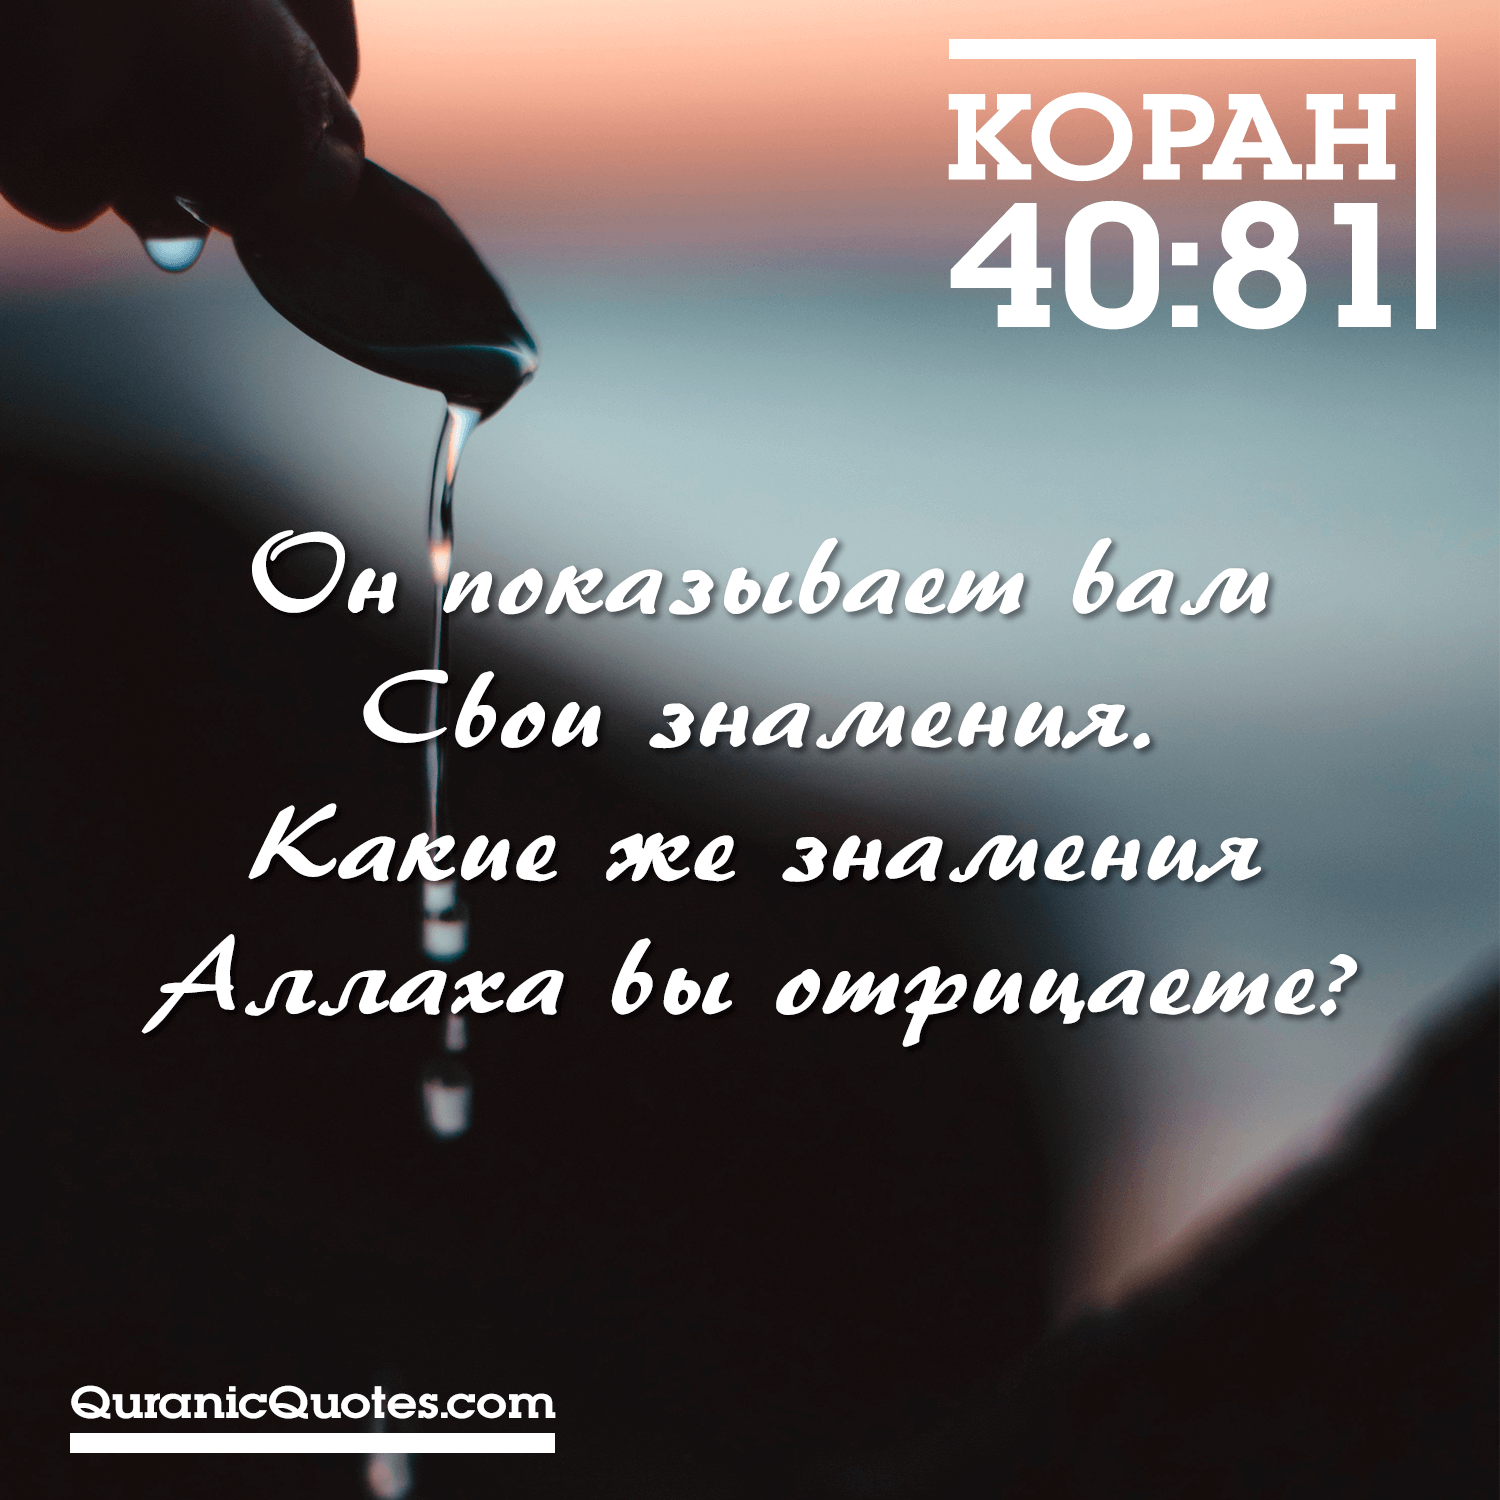 Quranic Quotes in Russian #65